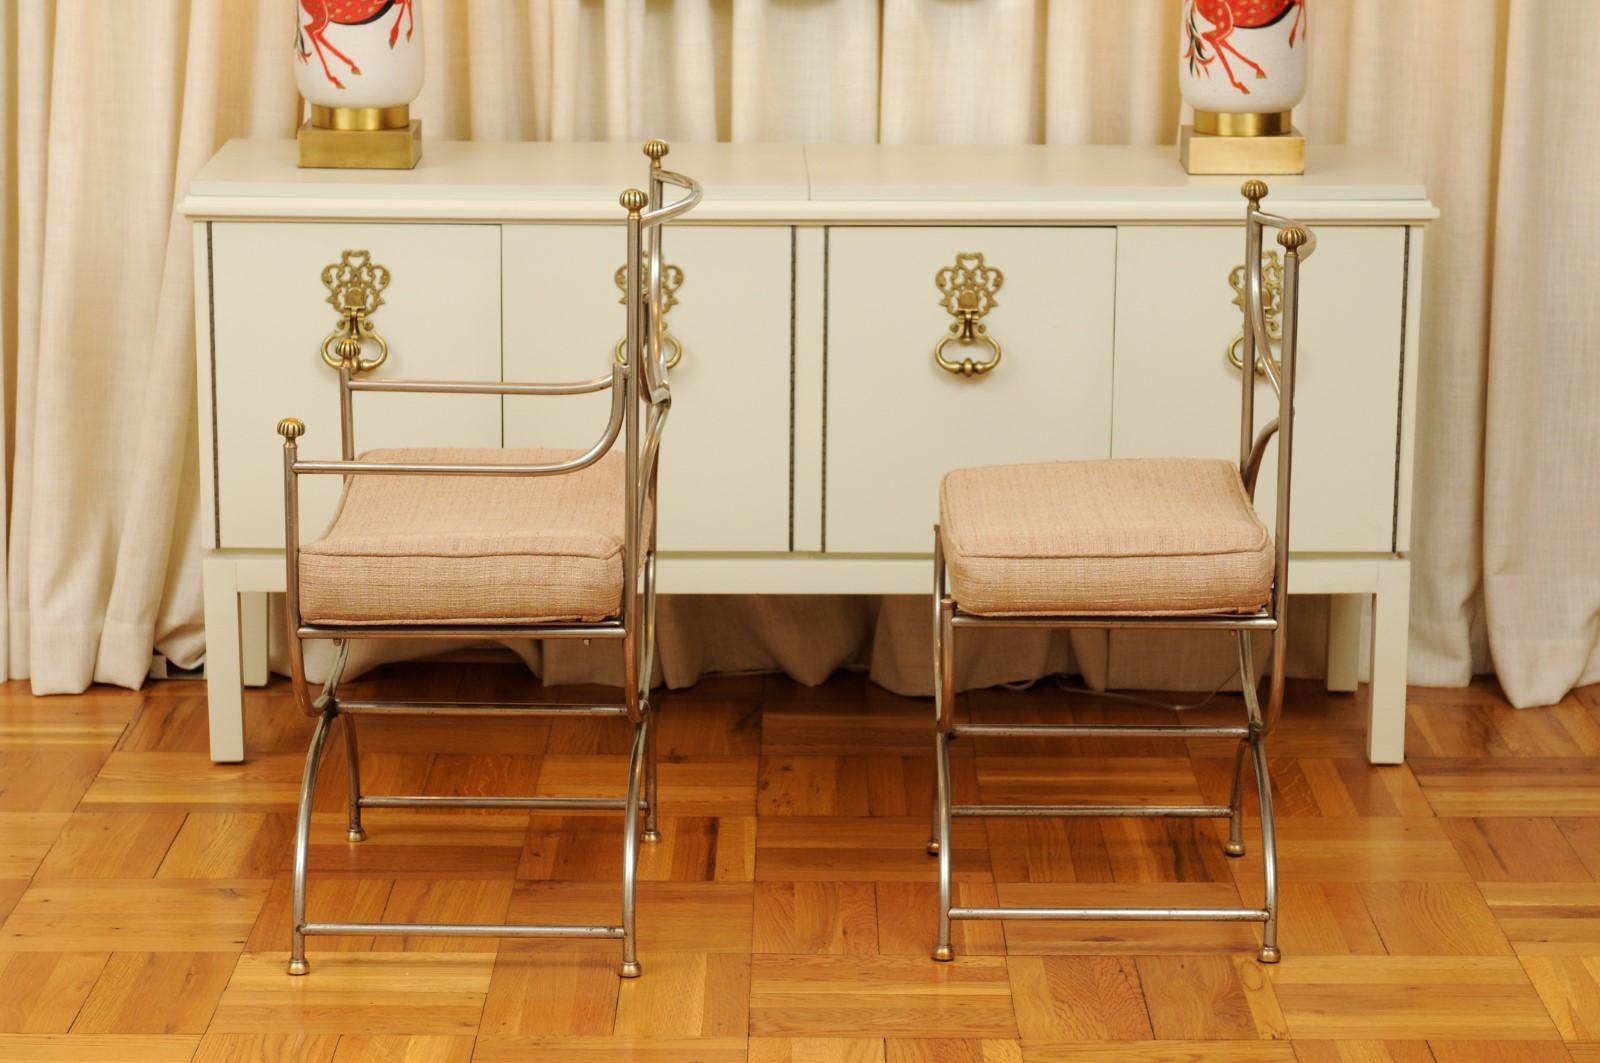 Breathtaking Set of 6 Polished Steel and Brass Chairs by Maison Jansen, 1965 For Sale 7